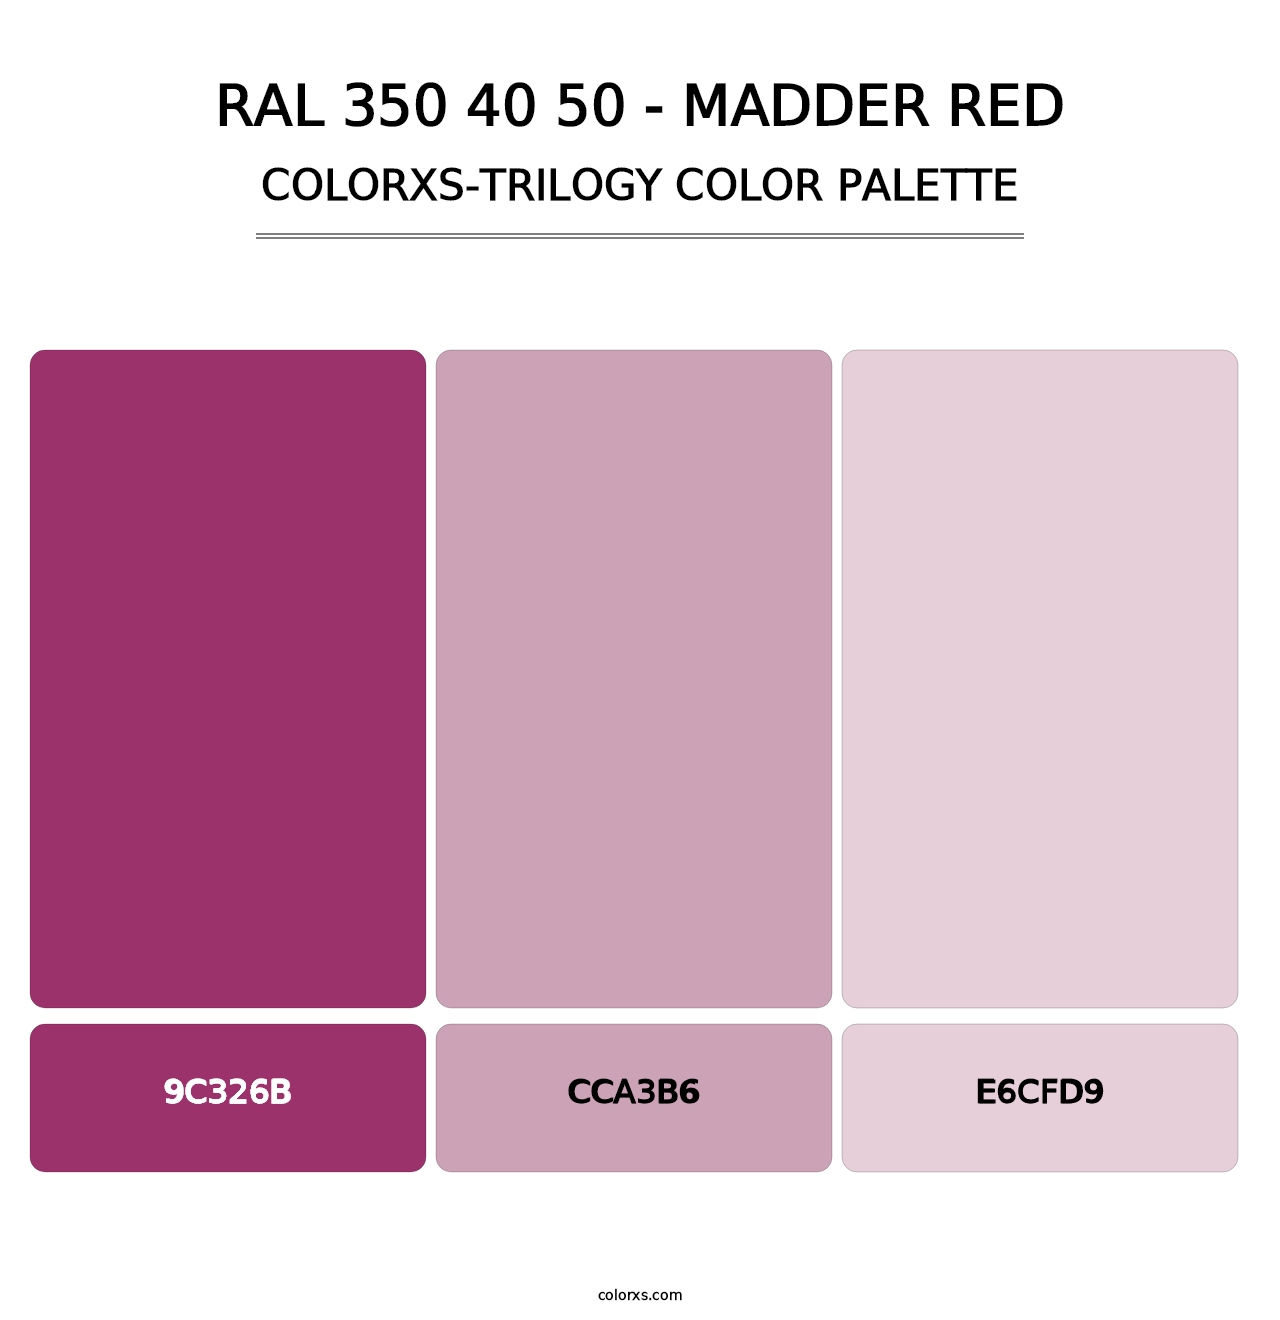 RAL 350 40 50 - Madder Red - Colorxs Trilogy Palette